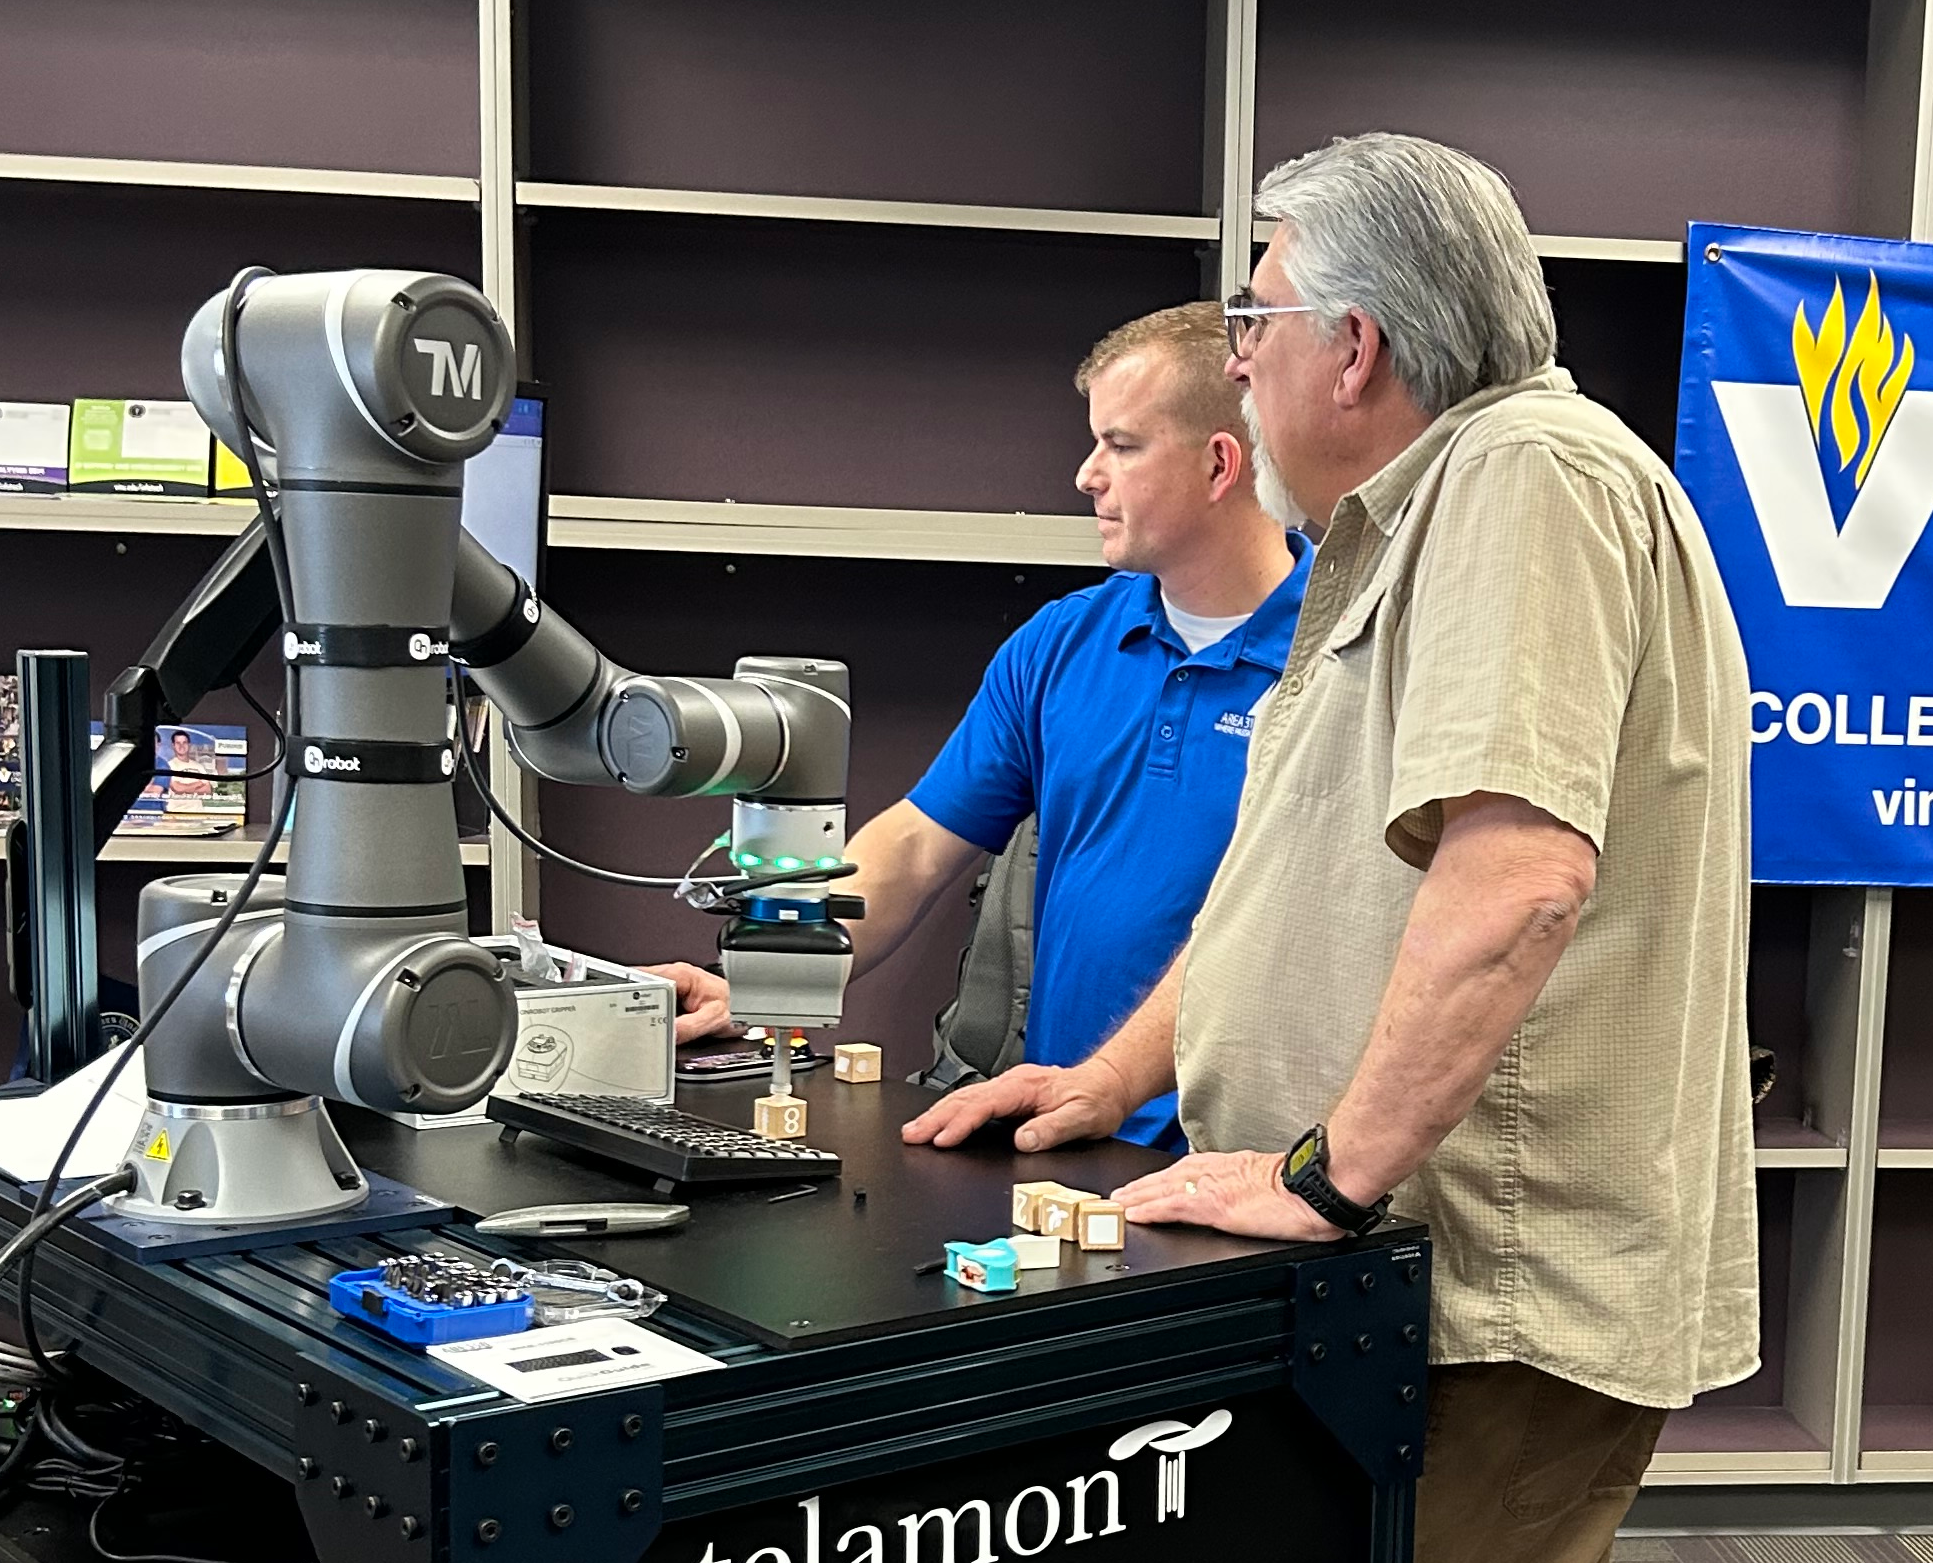 Two men use a collaborative robot during a training session.